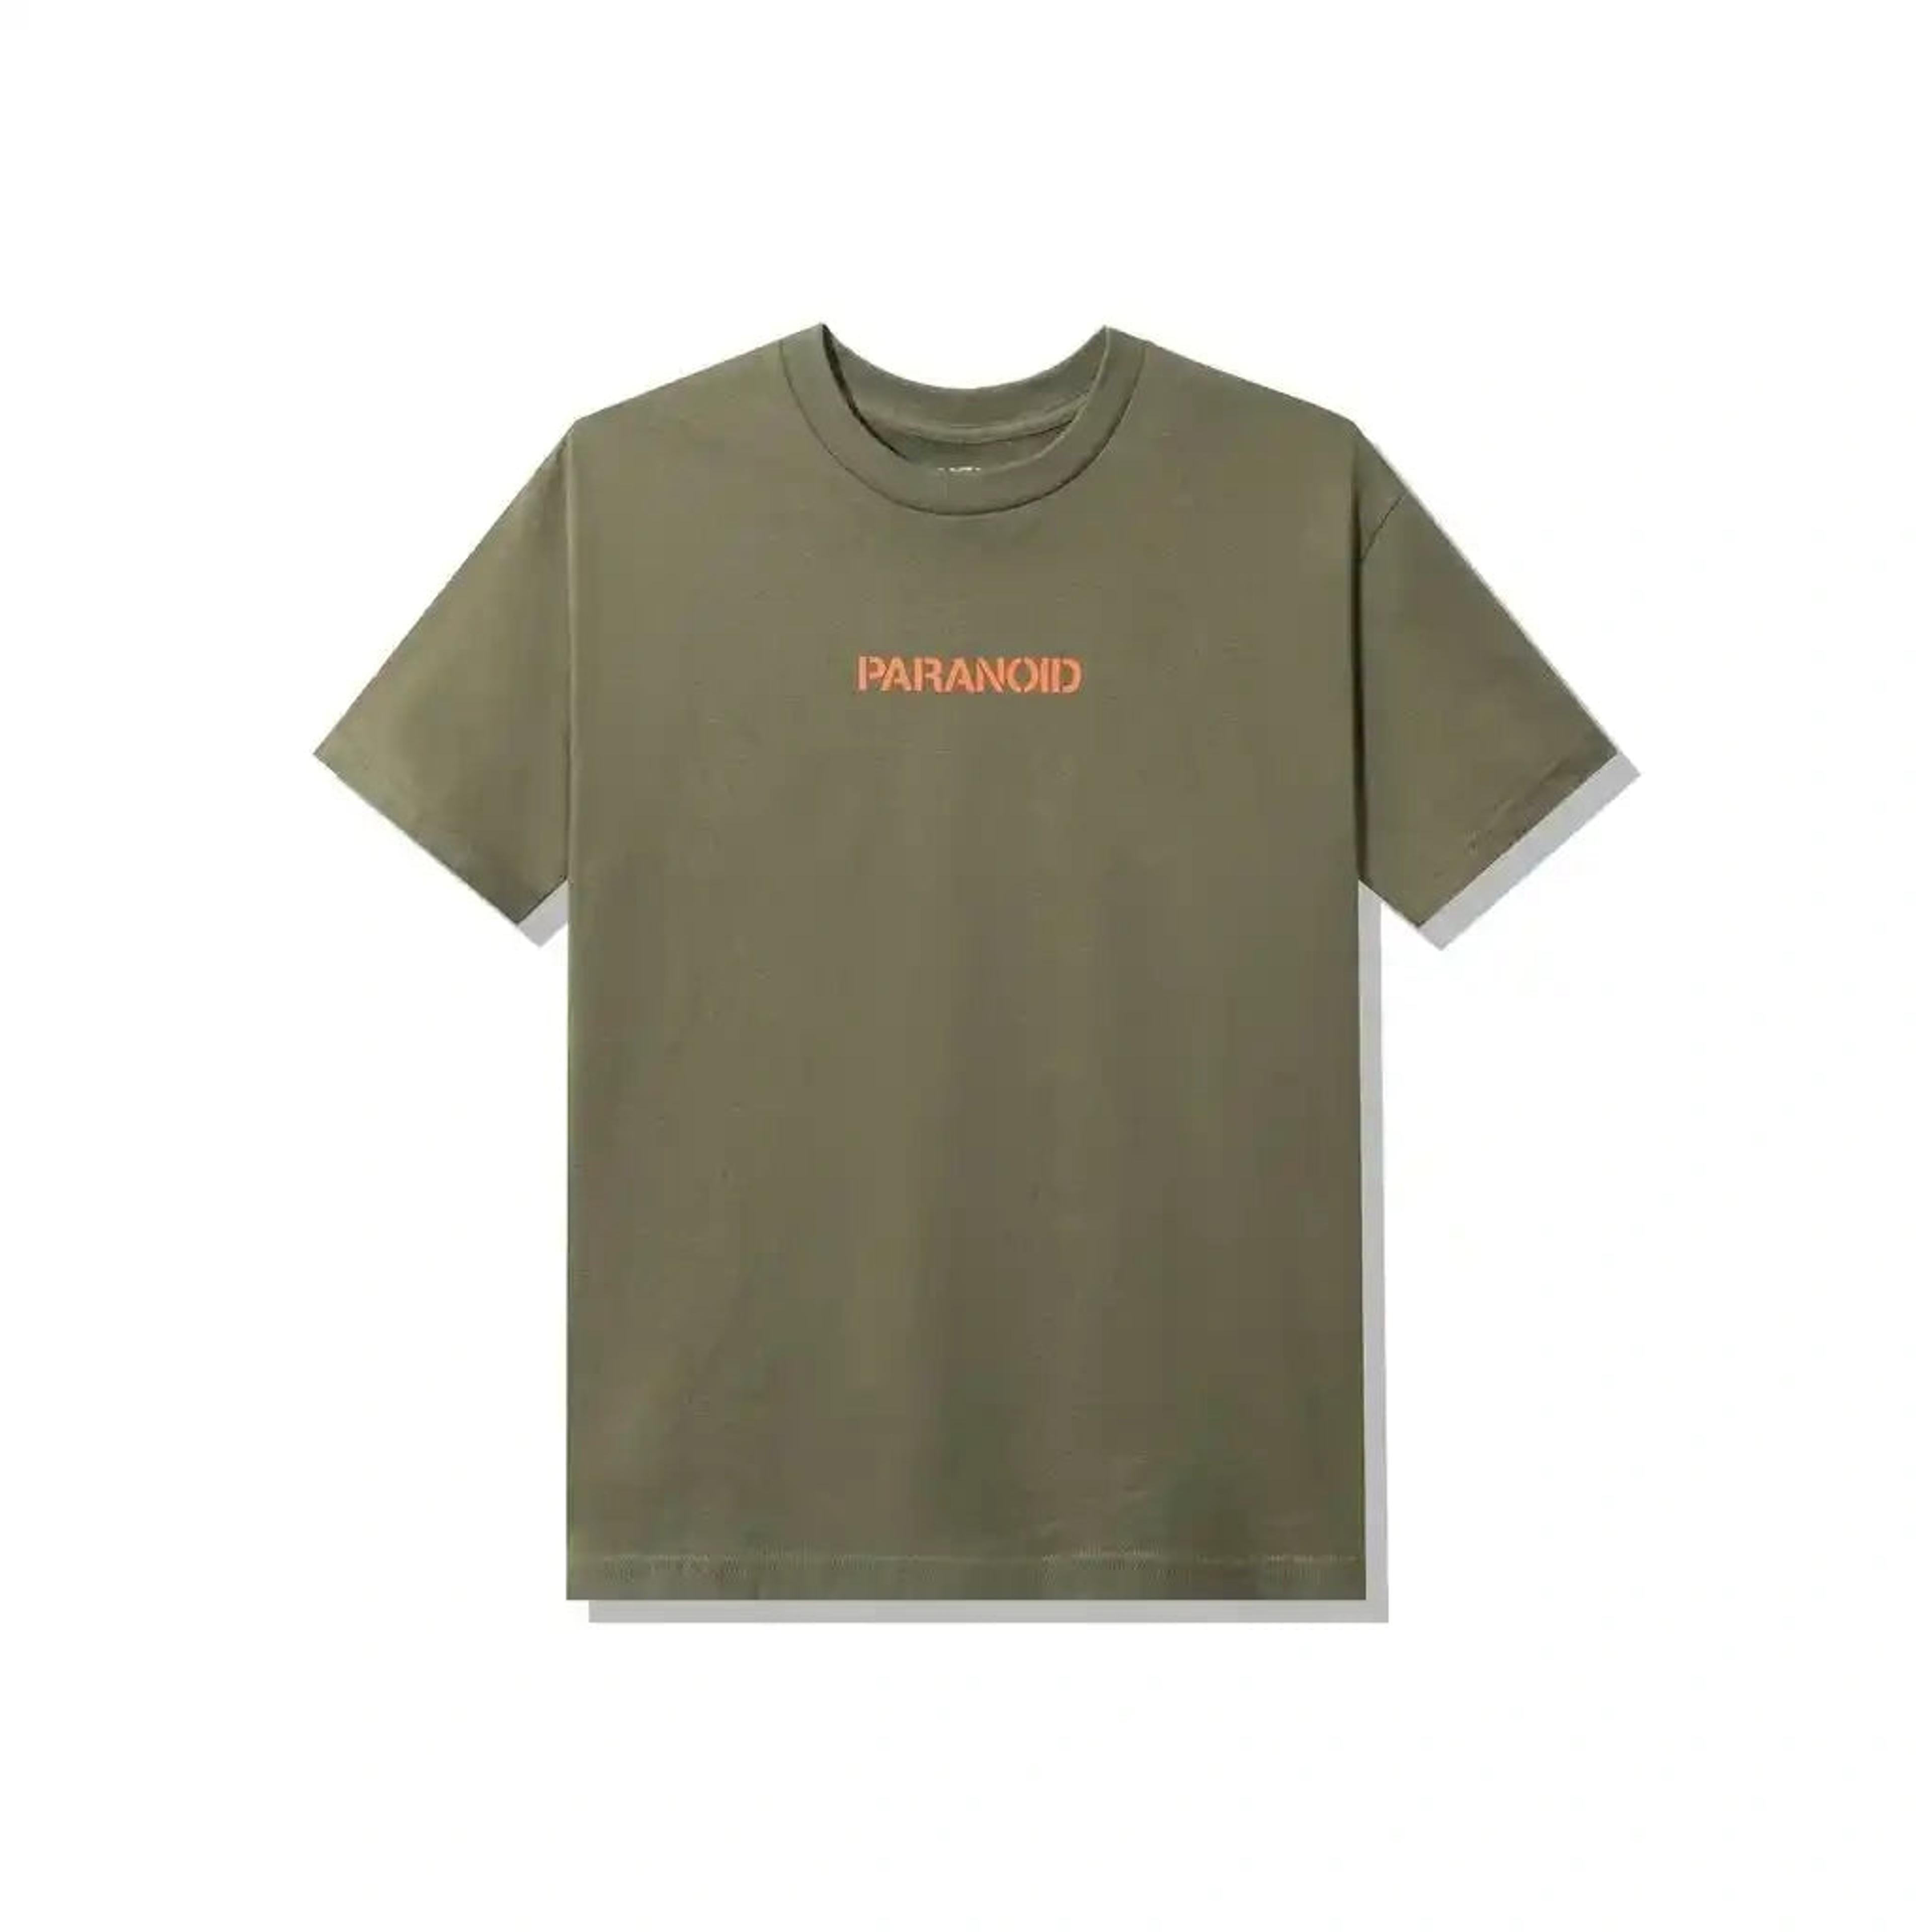 Anti Social Social Club X Undefeated Paranoid Olive Tee ASSC DS 